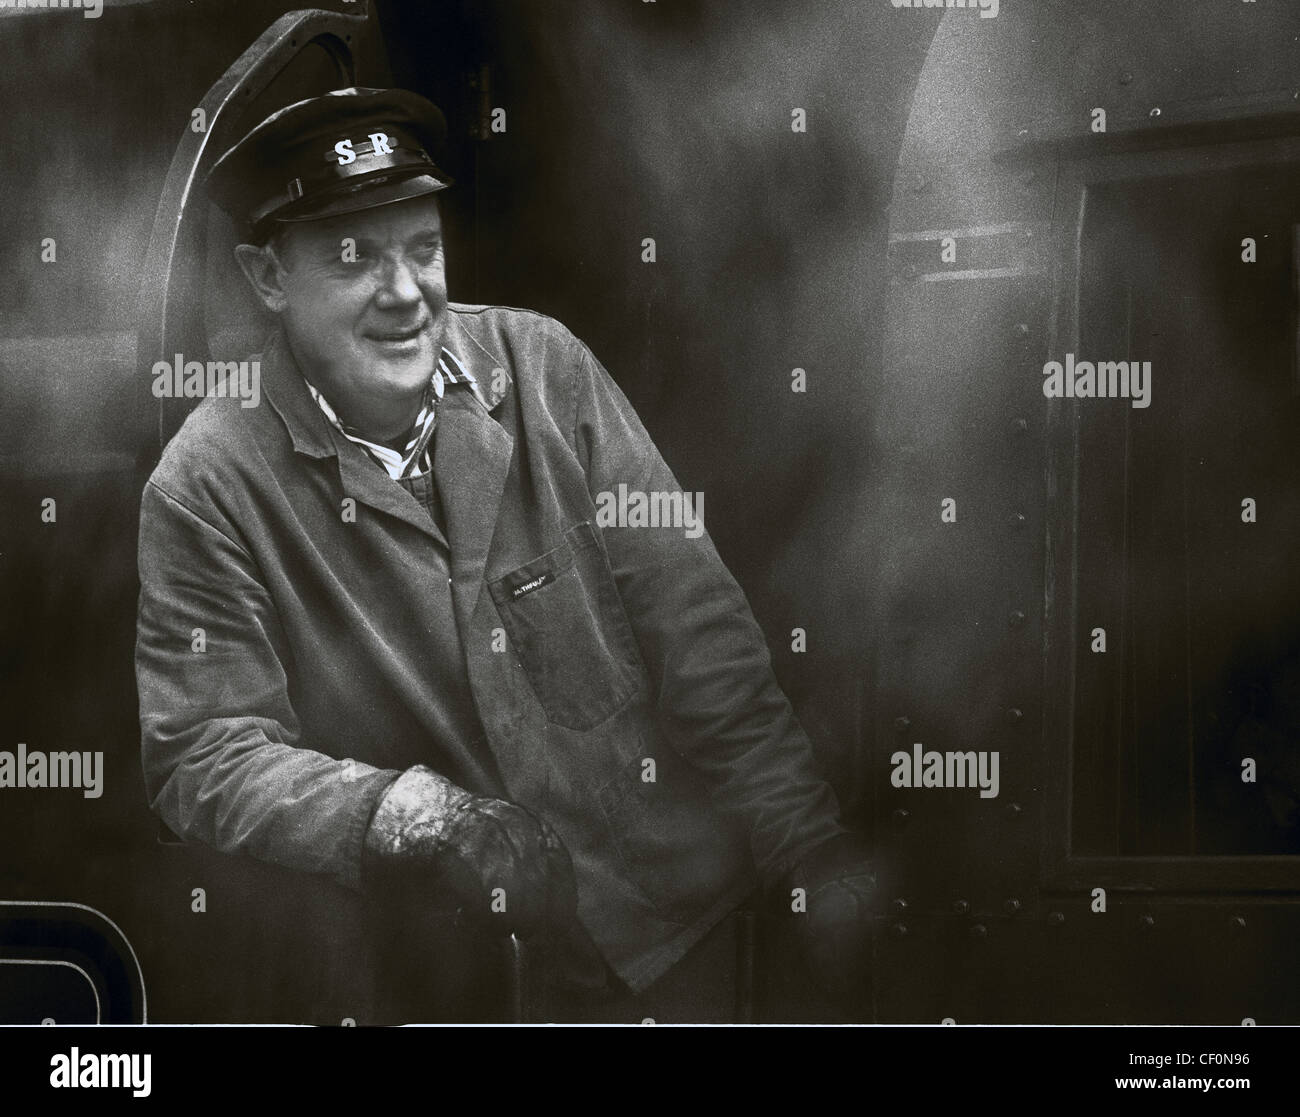 Steam train driver, on the Swanage Railway, Dorset, South West England, UK, in monochrome Stock Photo